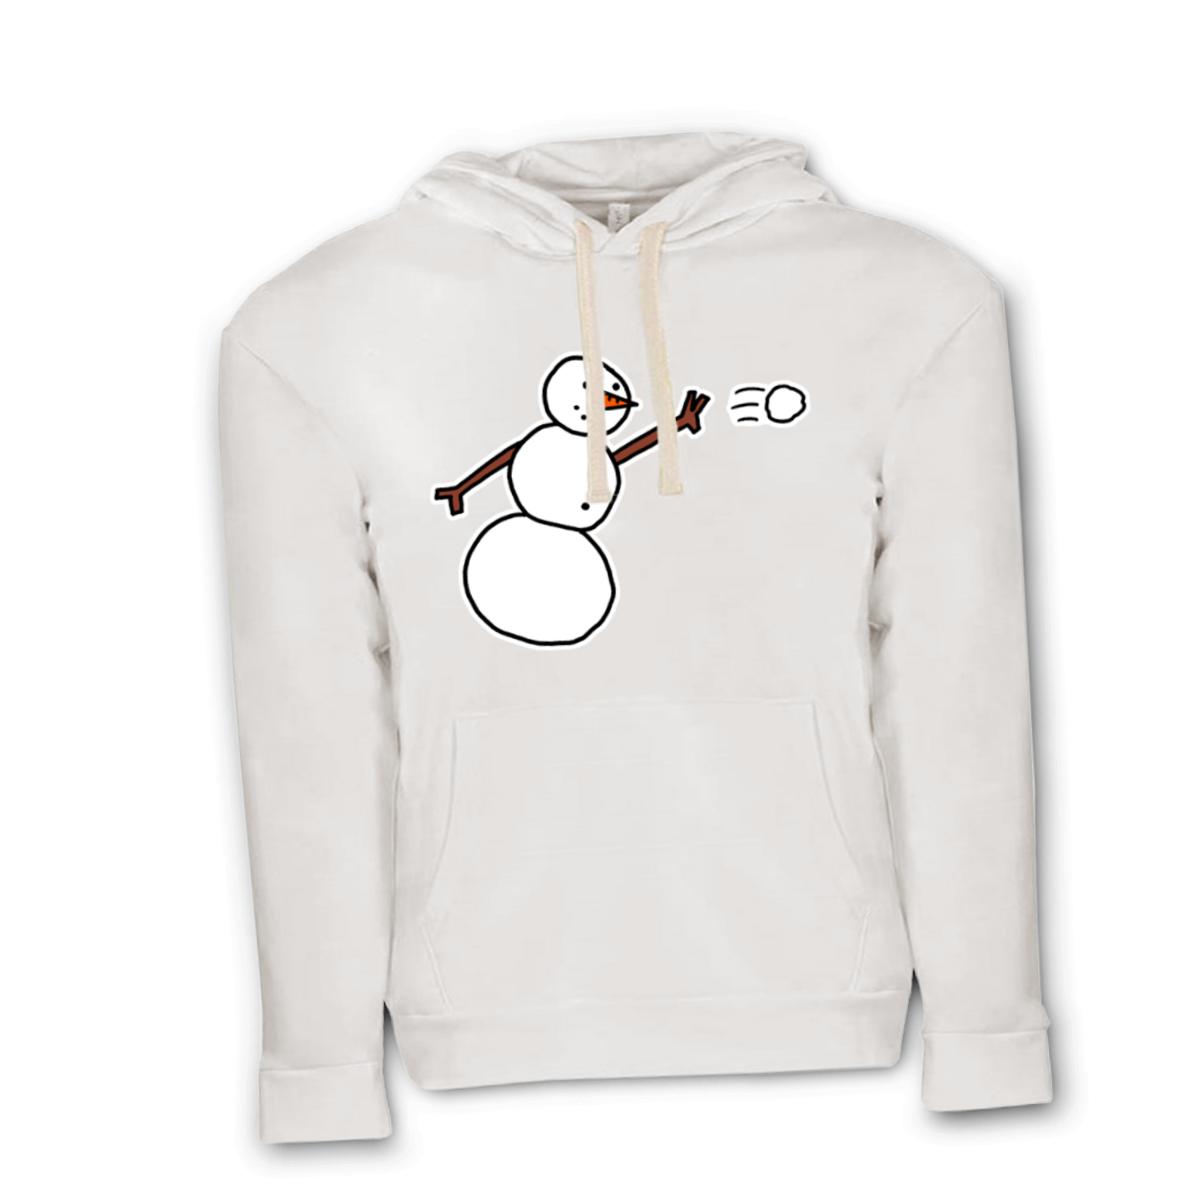 Snowman Throwing Snowball Unisex Pullover Hoodie Large white